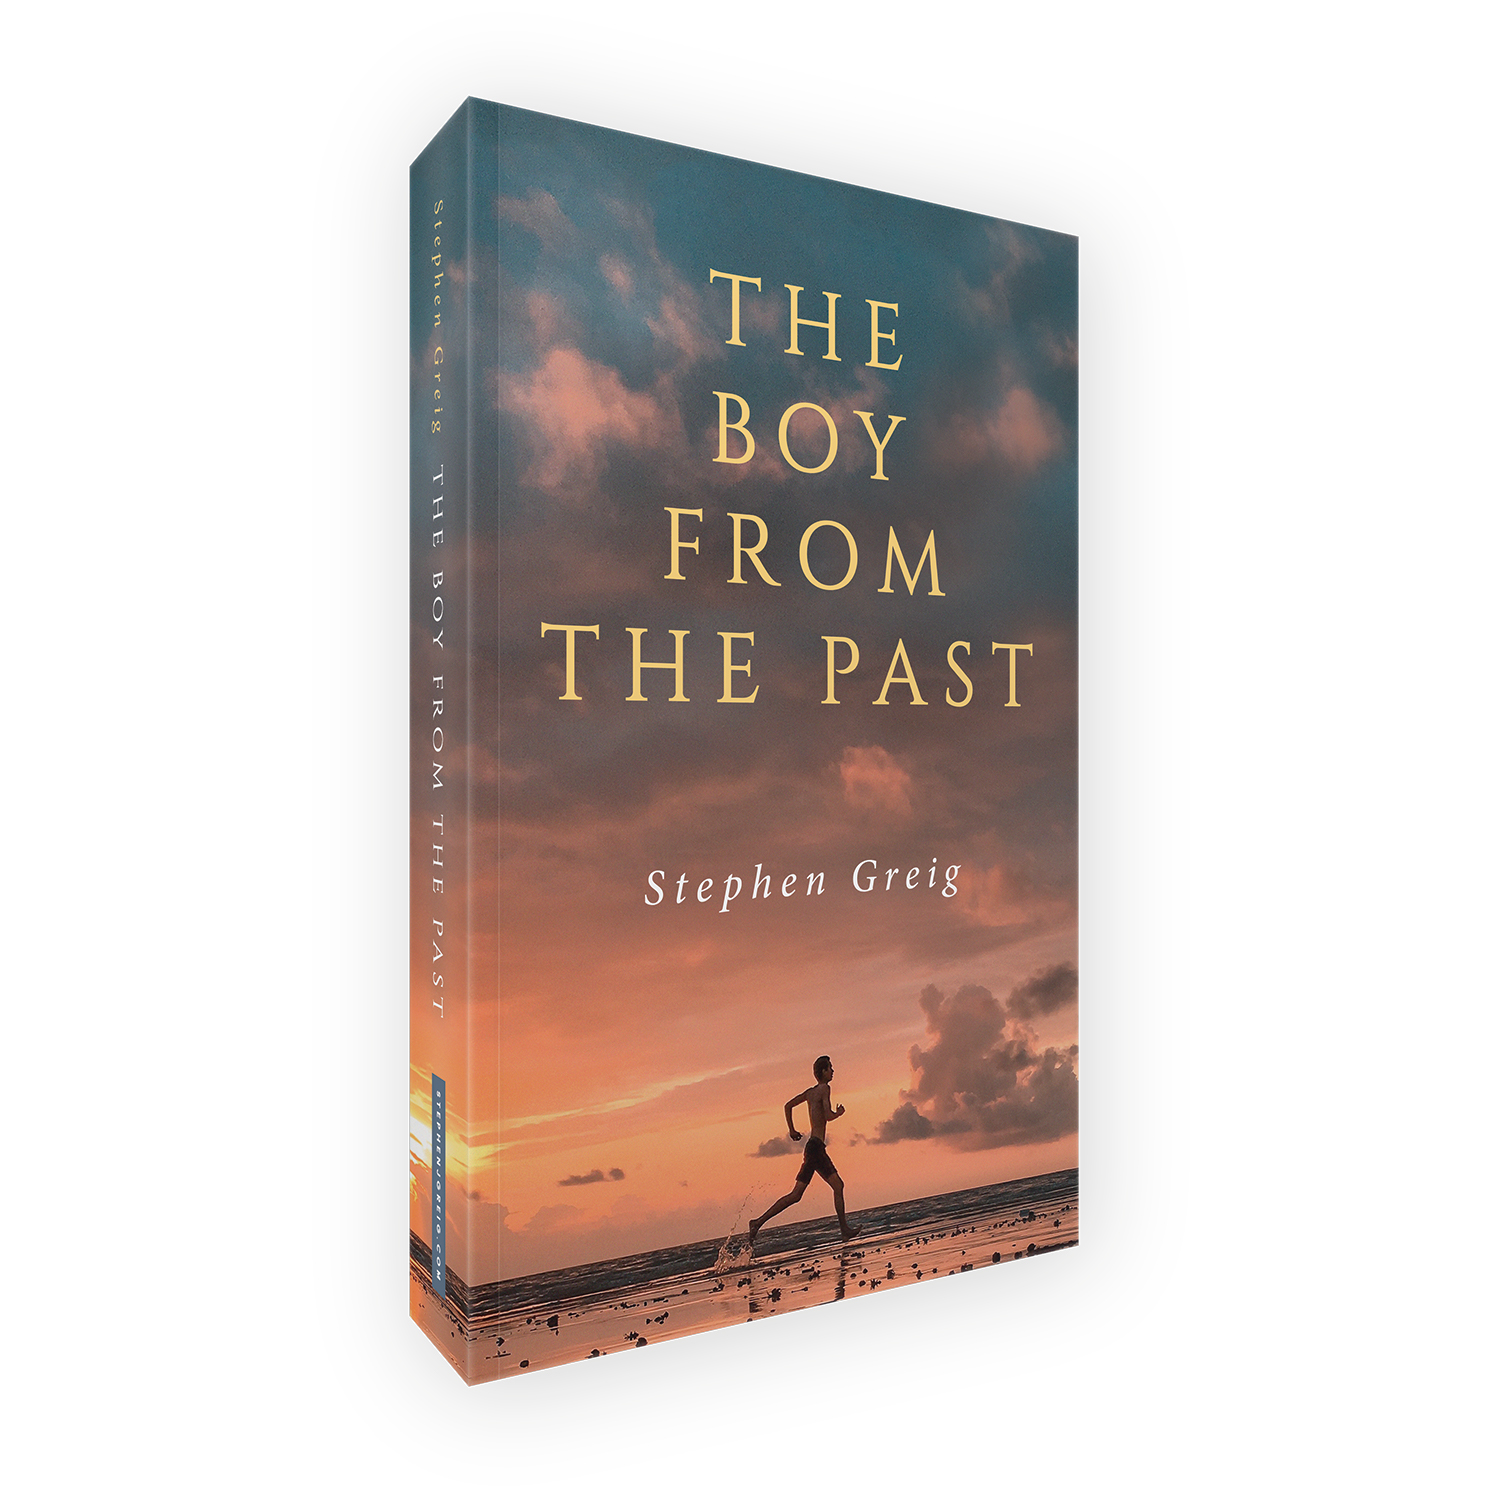 'The Boy From The Past' is an excellent time-spanning mystery, by author Stephen Grieg. The book cover and interior were designed by Mark Thomas, of coverness.com. To find out more about my book design services, please visit www.coverness.com.